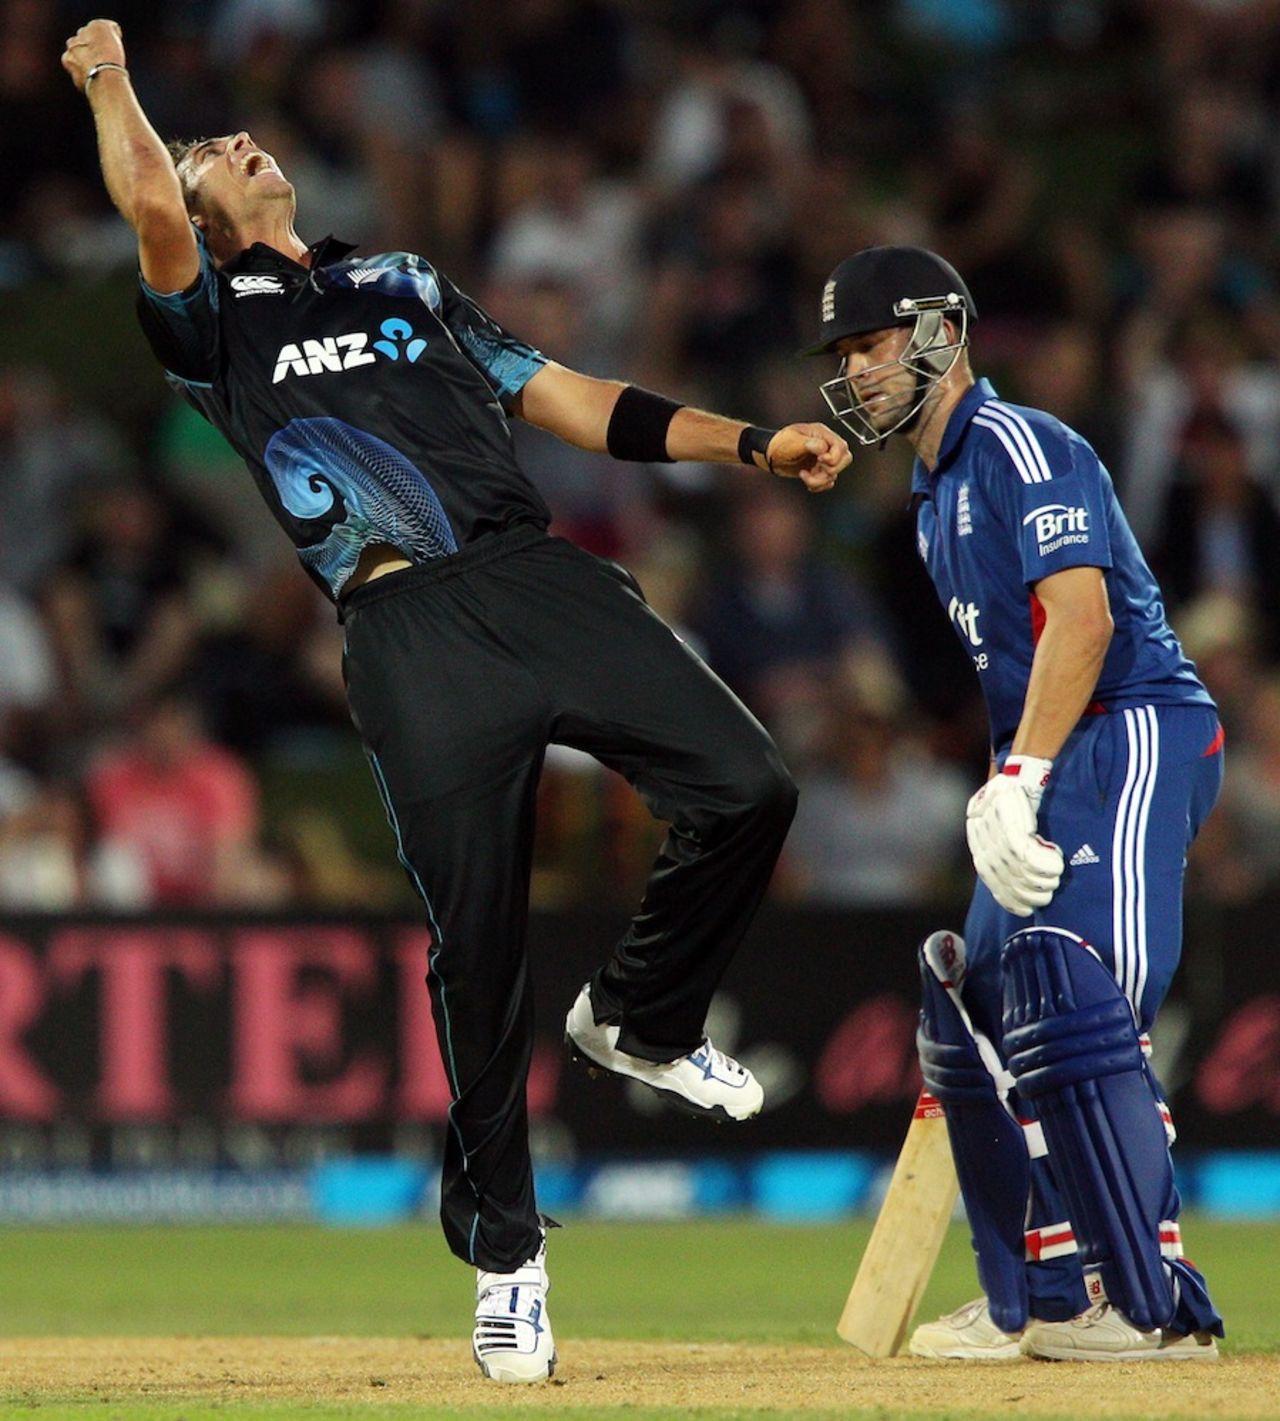 Tim Southee erupts in jubilation after picking up Alastair Cook's wicket, New Zealand v England, 2nd ODI, Napier, February 20, 2013